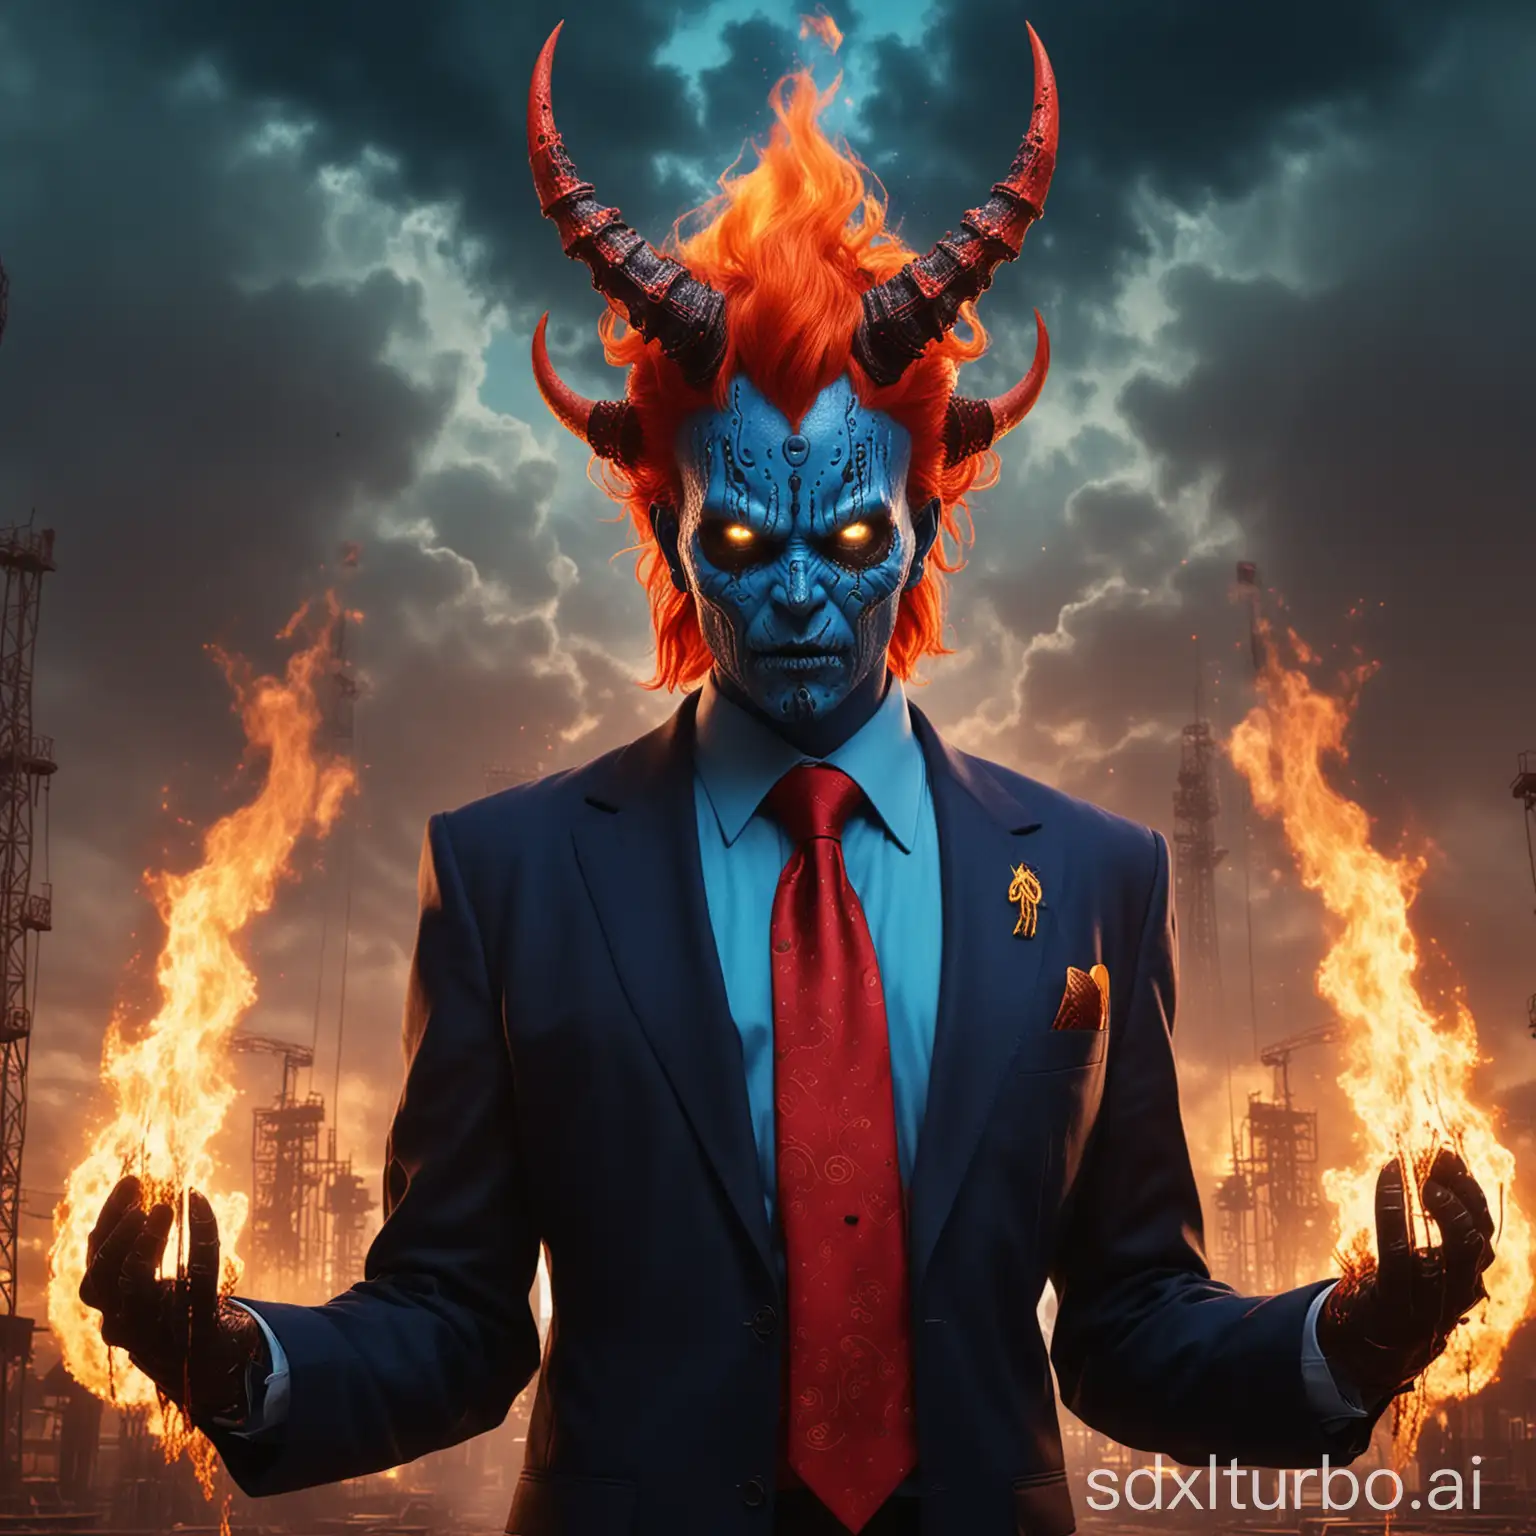 a furious skeletal fire-breathing malicious space demon Kali Purush stands, directly facing the camera, adorned in an intricate black garb and sporting fiery wings. Flames erupt from the hands while menacing horns adorn the head.   the red and yellow lighting.   an evil, greedy oil industry executive with orange hair, wearing a (blue business suit:1.5) and (red tie:1.5) and looks like Donald Trump  (drilling the earth for oil:1.25) causing climate change and bringing fiery devastation to the earth surface.   lightning surrounds the demon Kali Purush intricate details oil drilling towers are seen on the surface planet surface fires well drawn faces